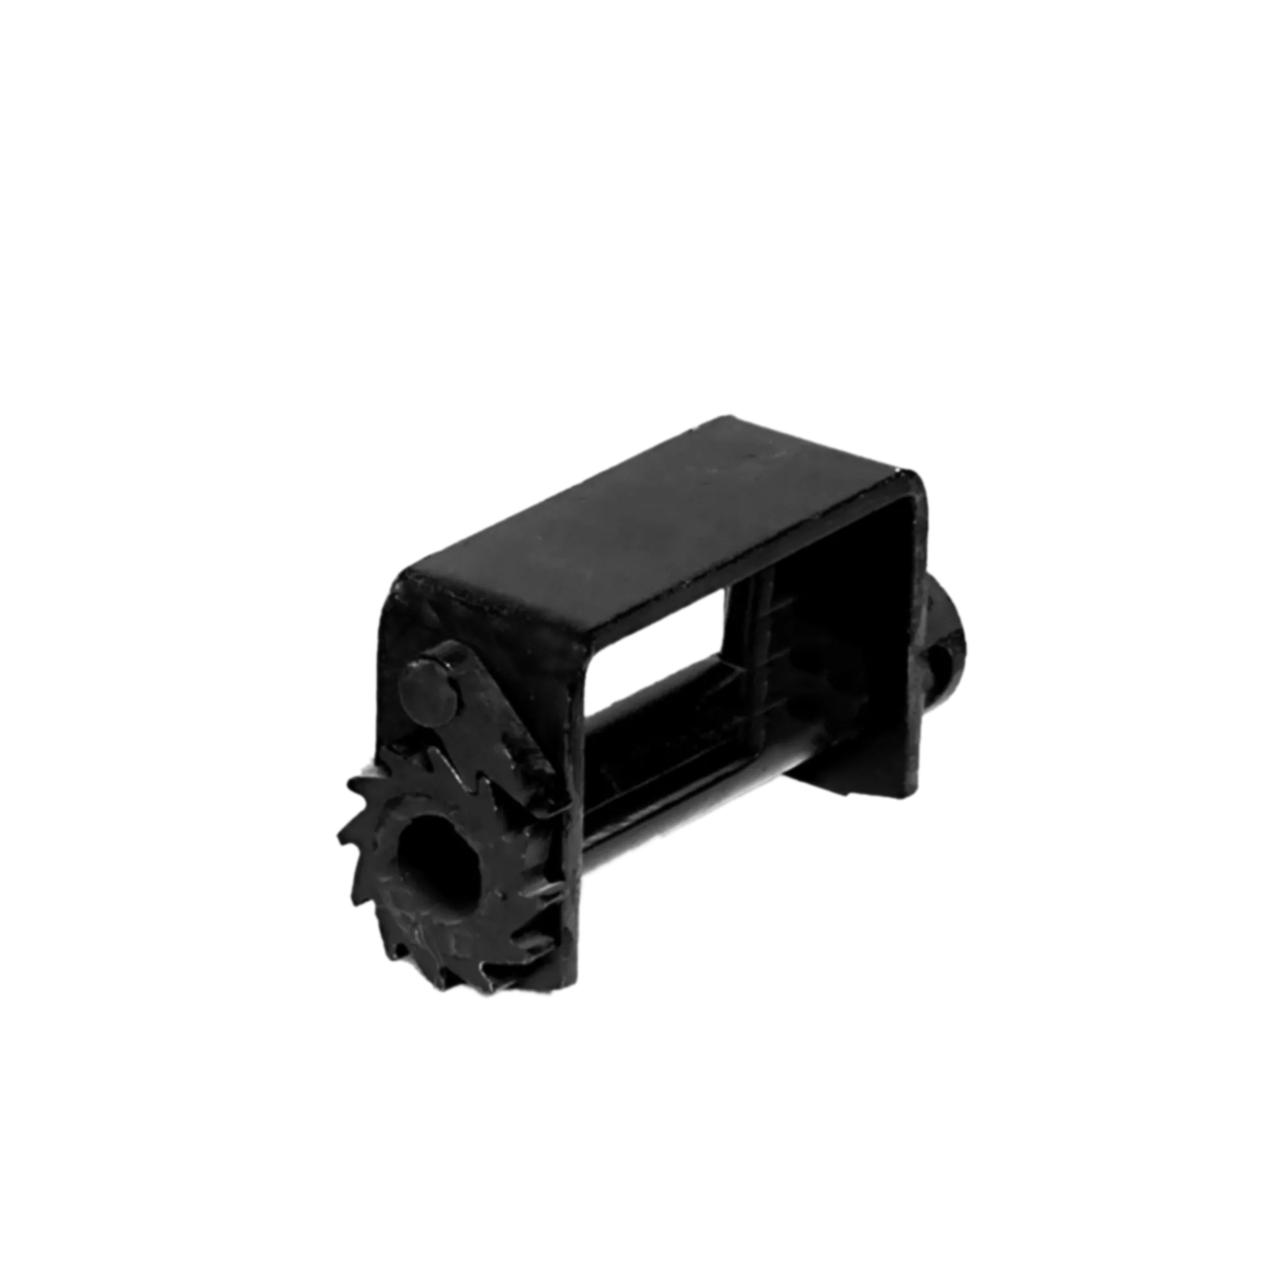 Winch Combi 24 mm hole for Tension toole